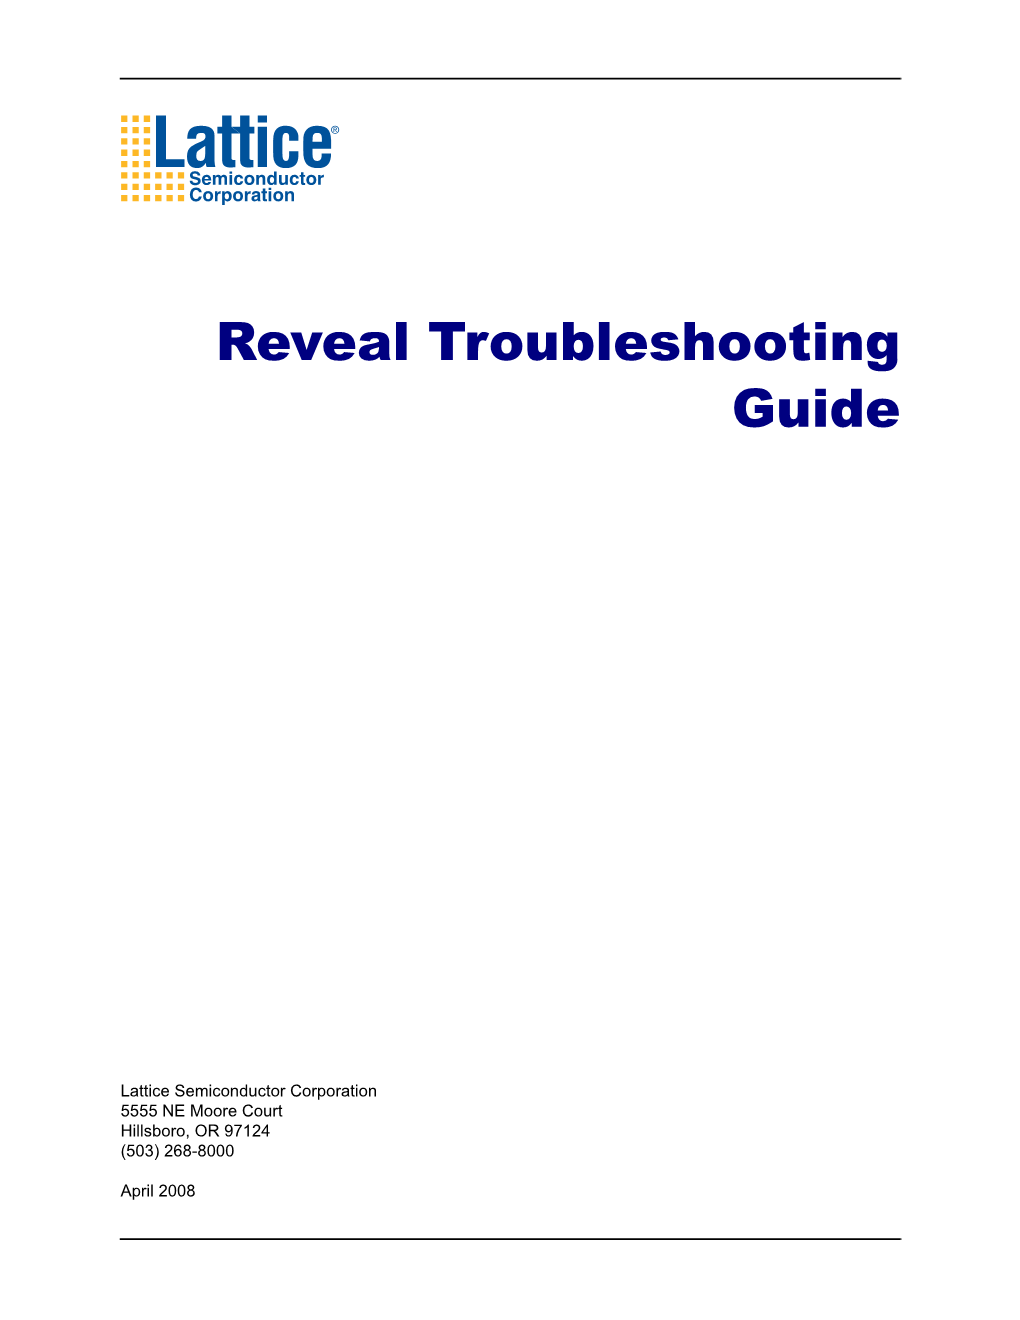 Reveal Troubleshooting Guide